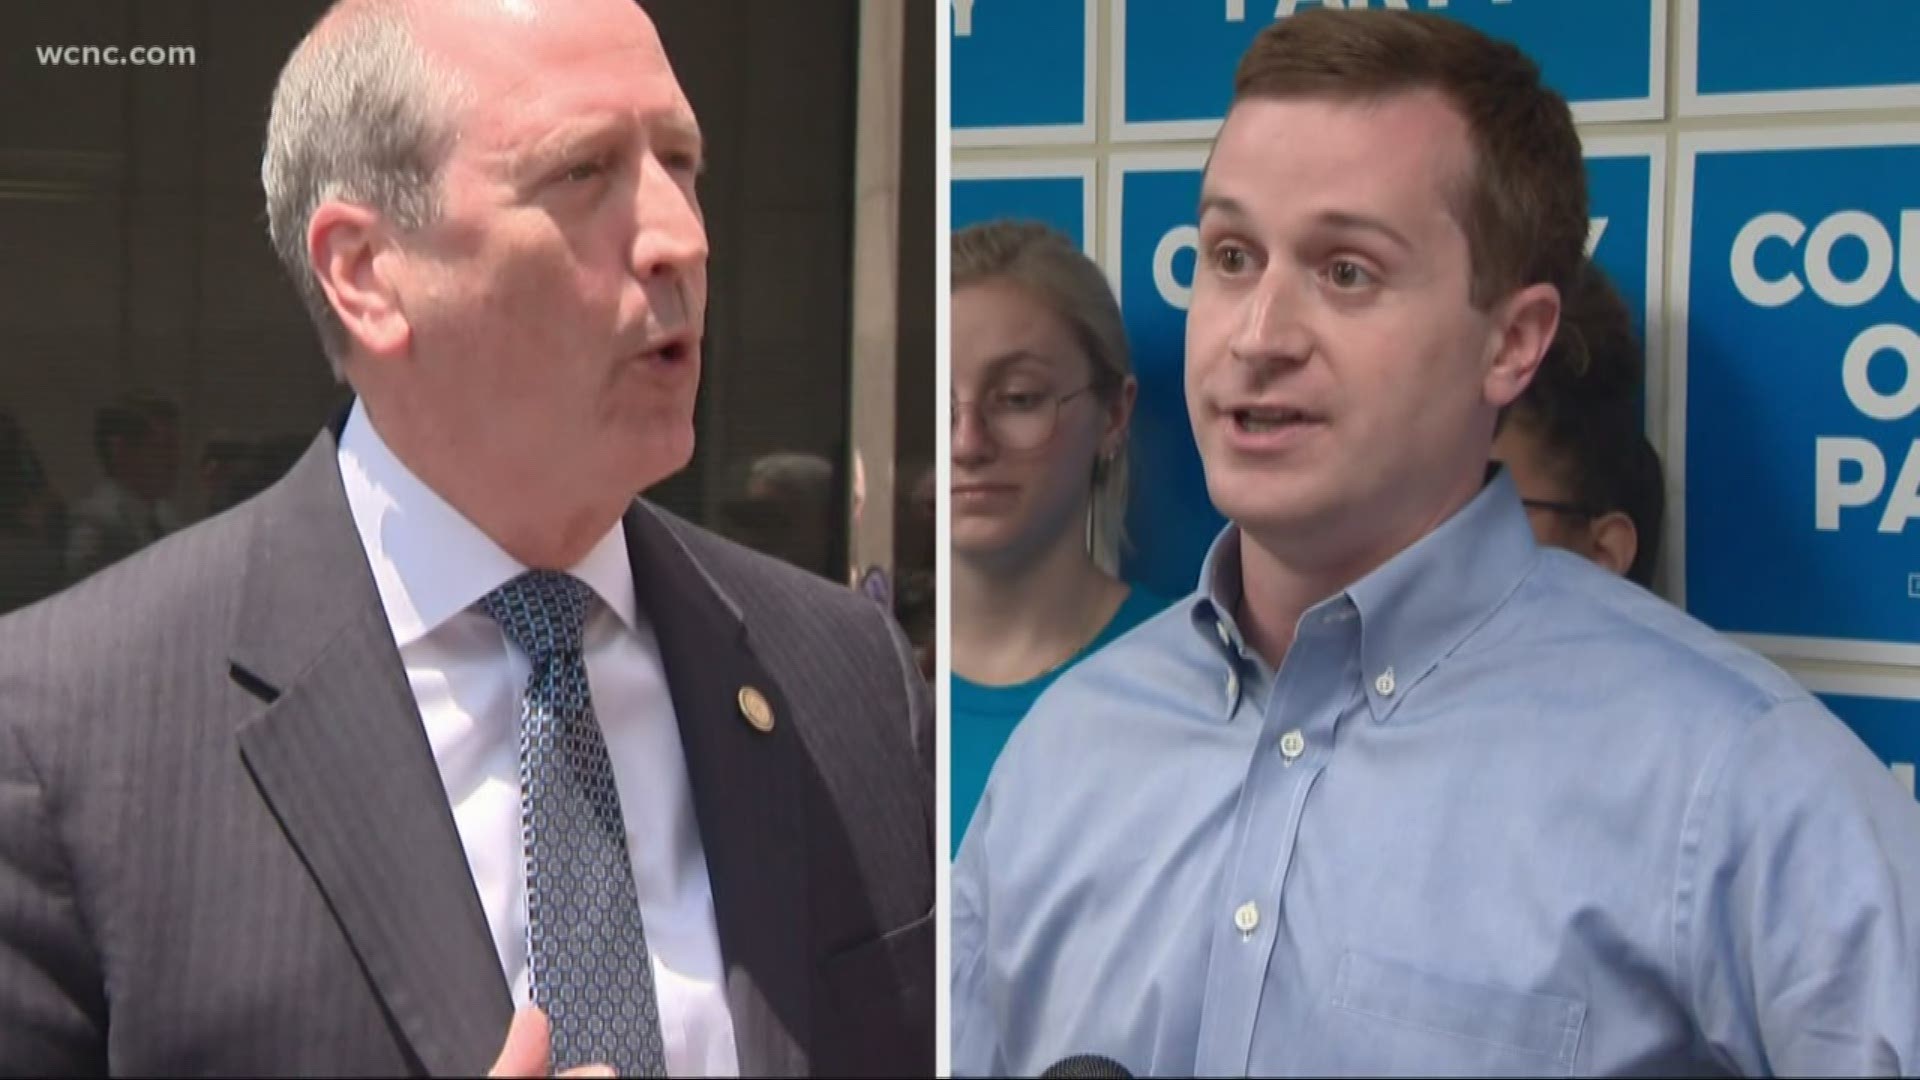 Republican Dan Bishop and Democrat Dan McCready are calling for an extension for early voting in the 9th District race. Early voting was shut down early in several counties due to Hurricane Dorian.